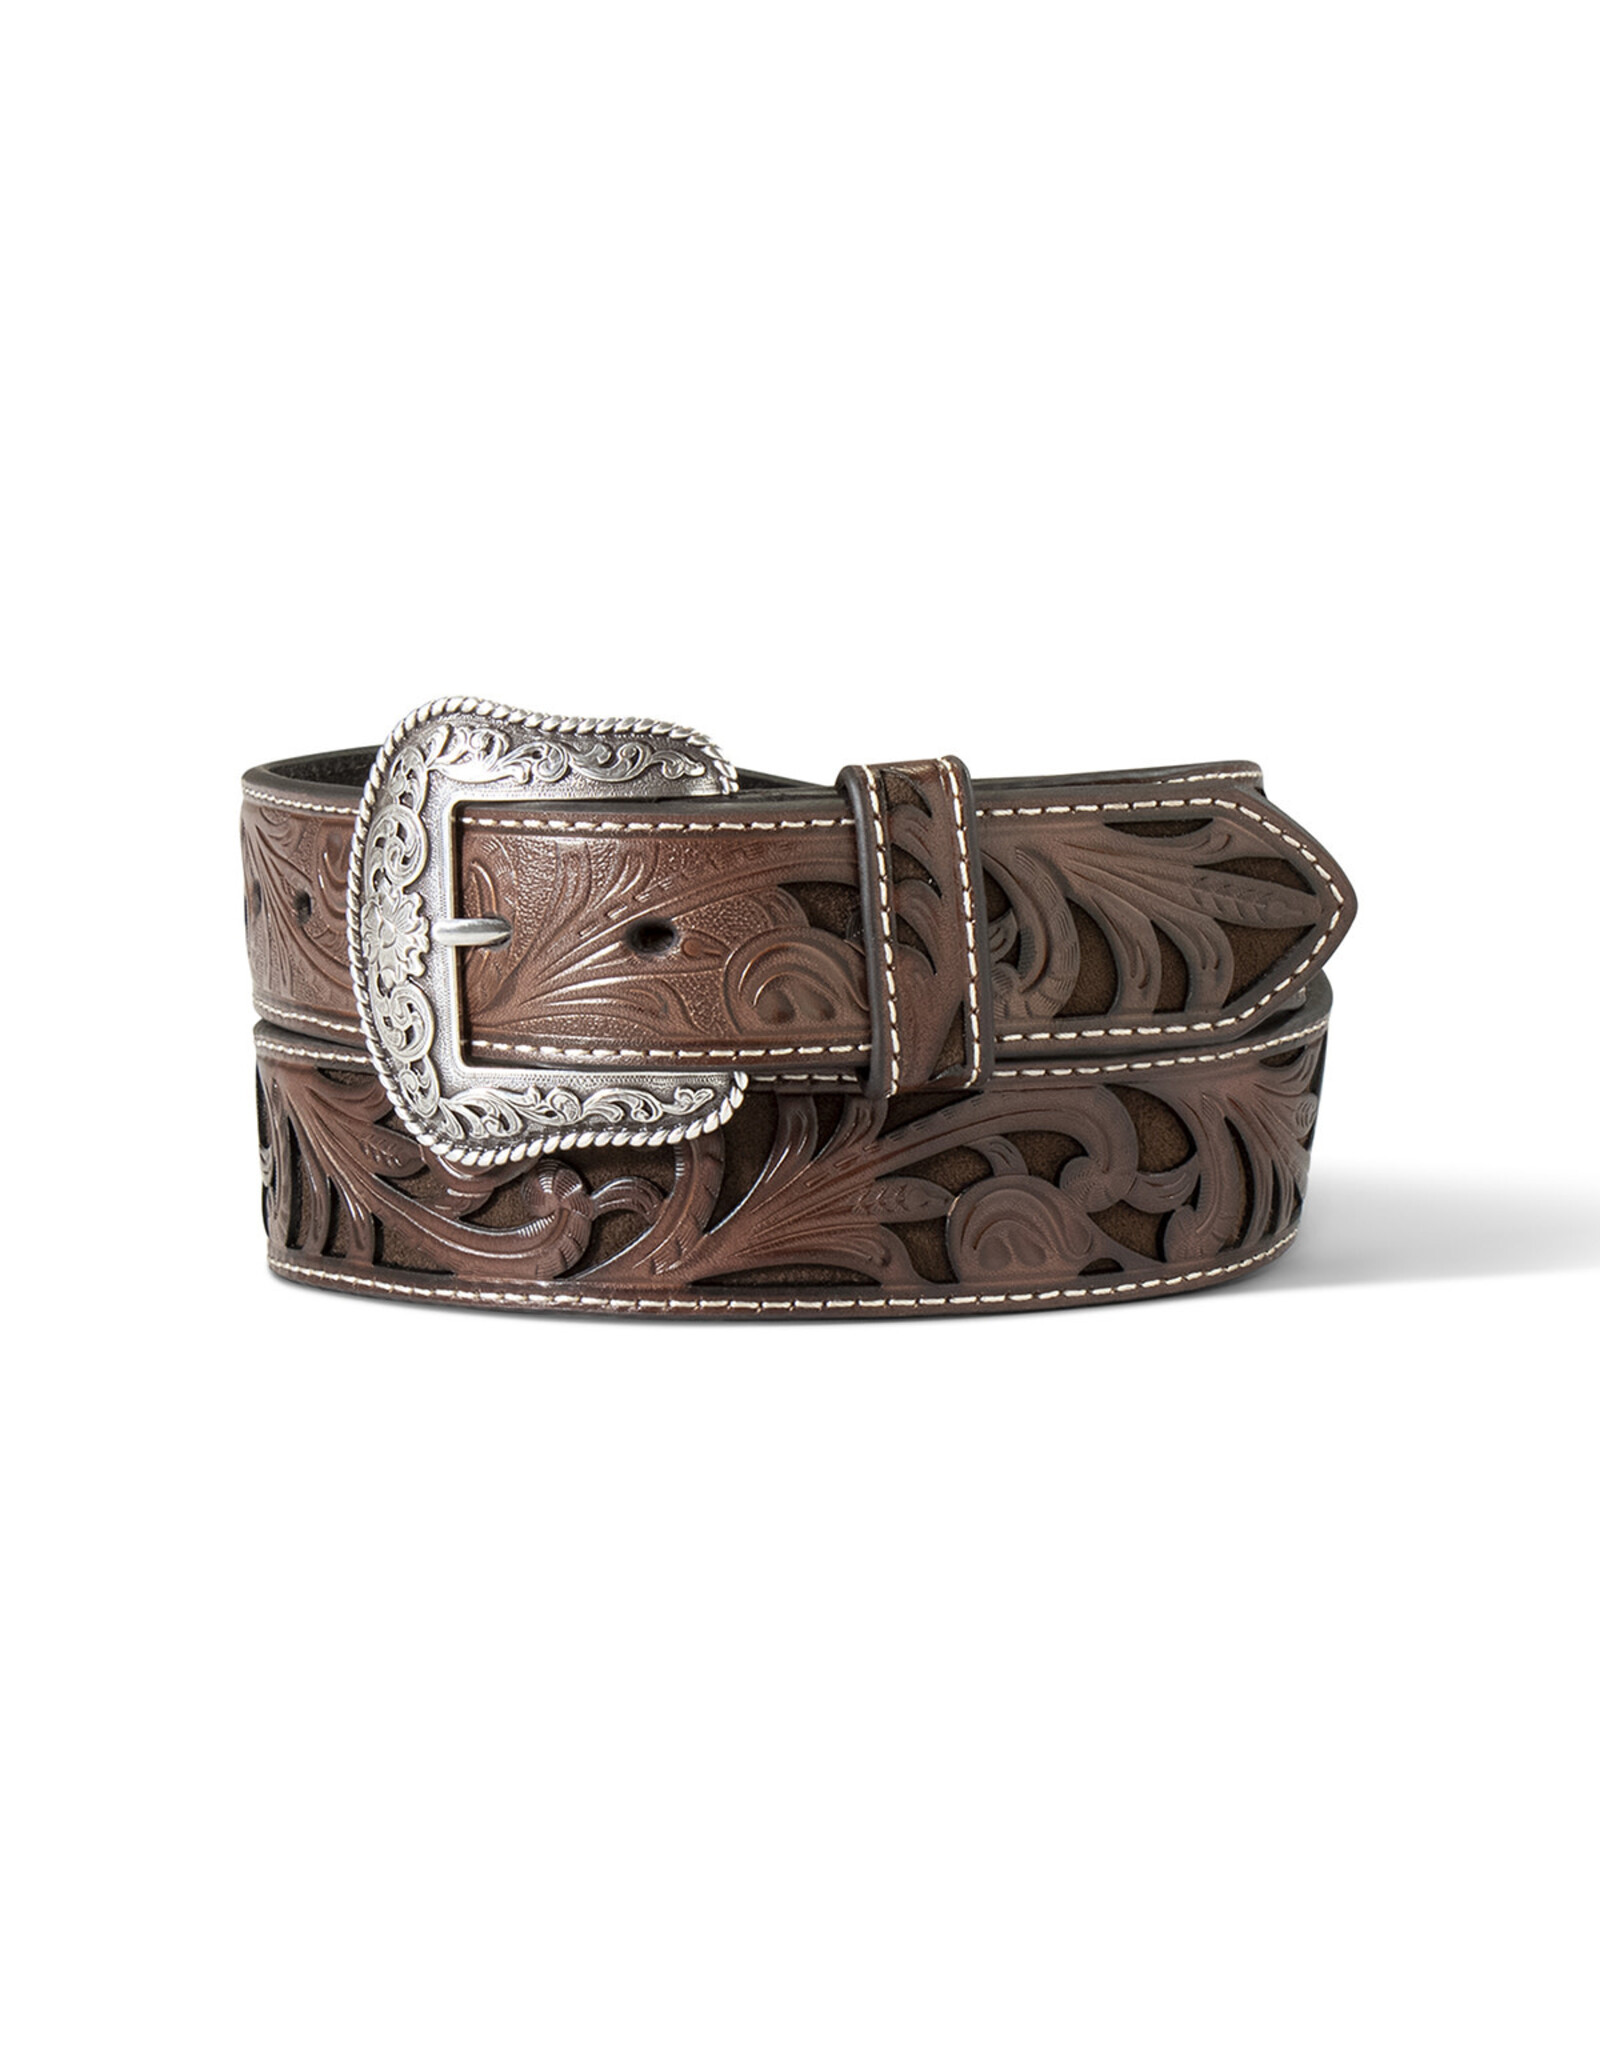 Ariat Ariat Brown Tooled With Inlay Belt A1565002